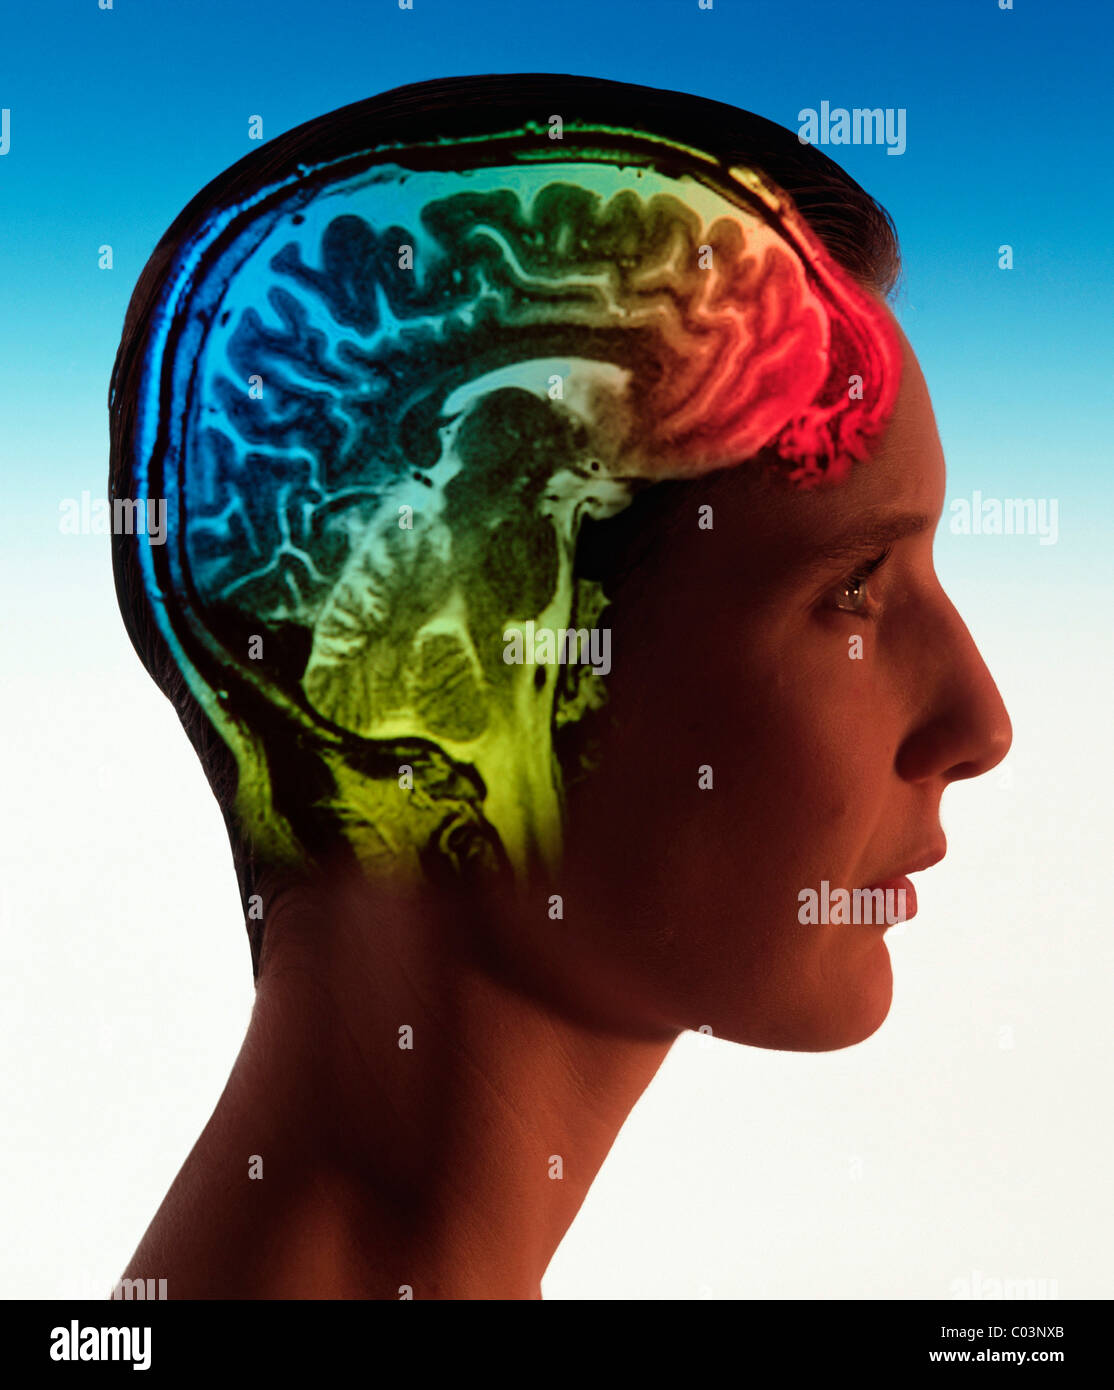 Brain scan super-imposed on head of woman Stock Photo